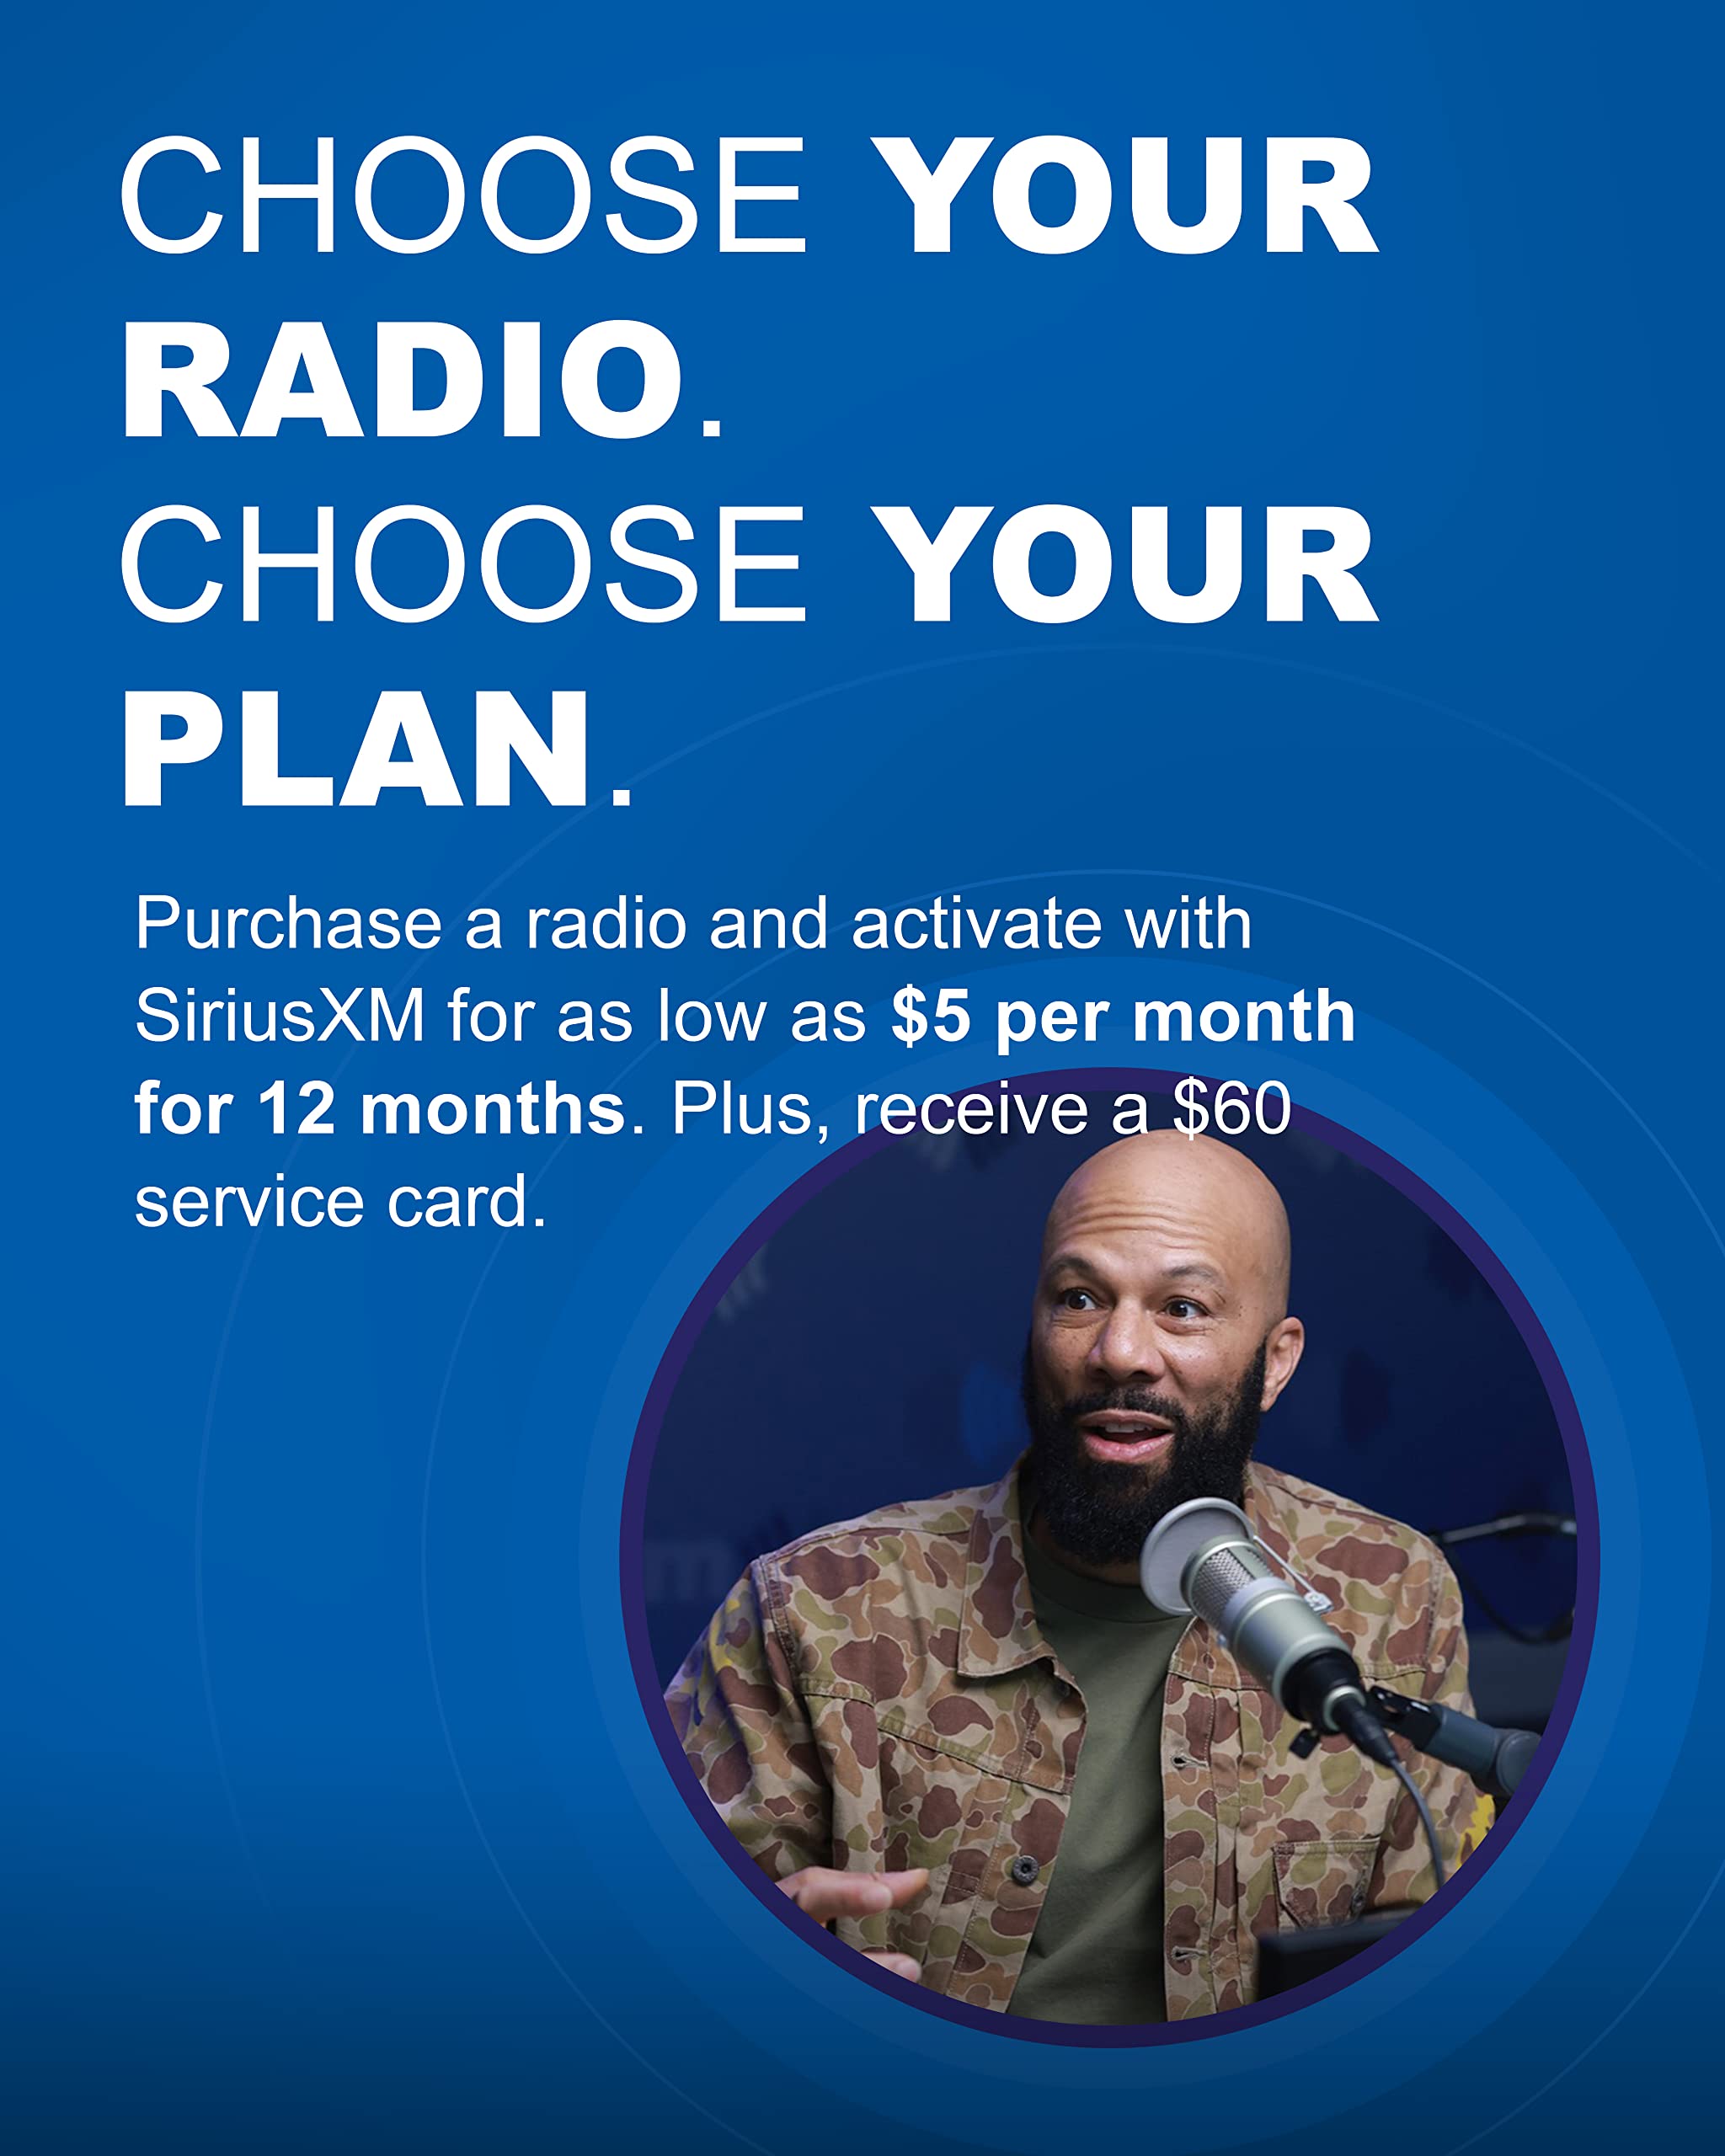 SiriusXM Onyx Plus Satellite Radio w/ Vehicle Kit, Enjoy SiriusXM Through your Existing Car Stereo for as Low as $5/month + $60 Service Card with Activation